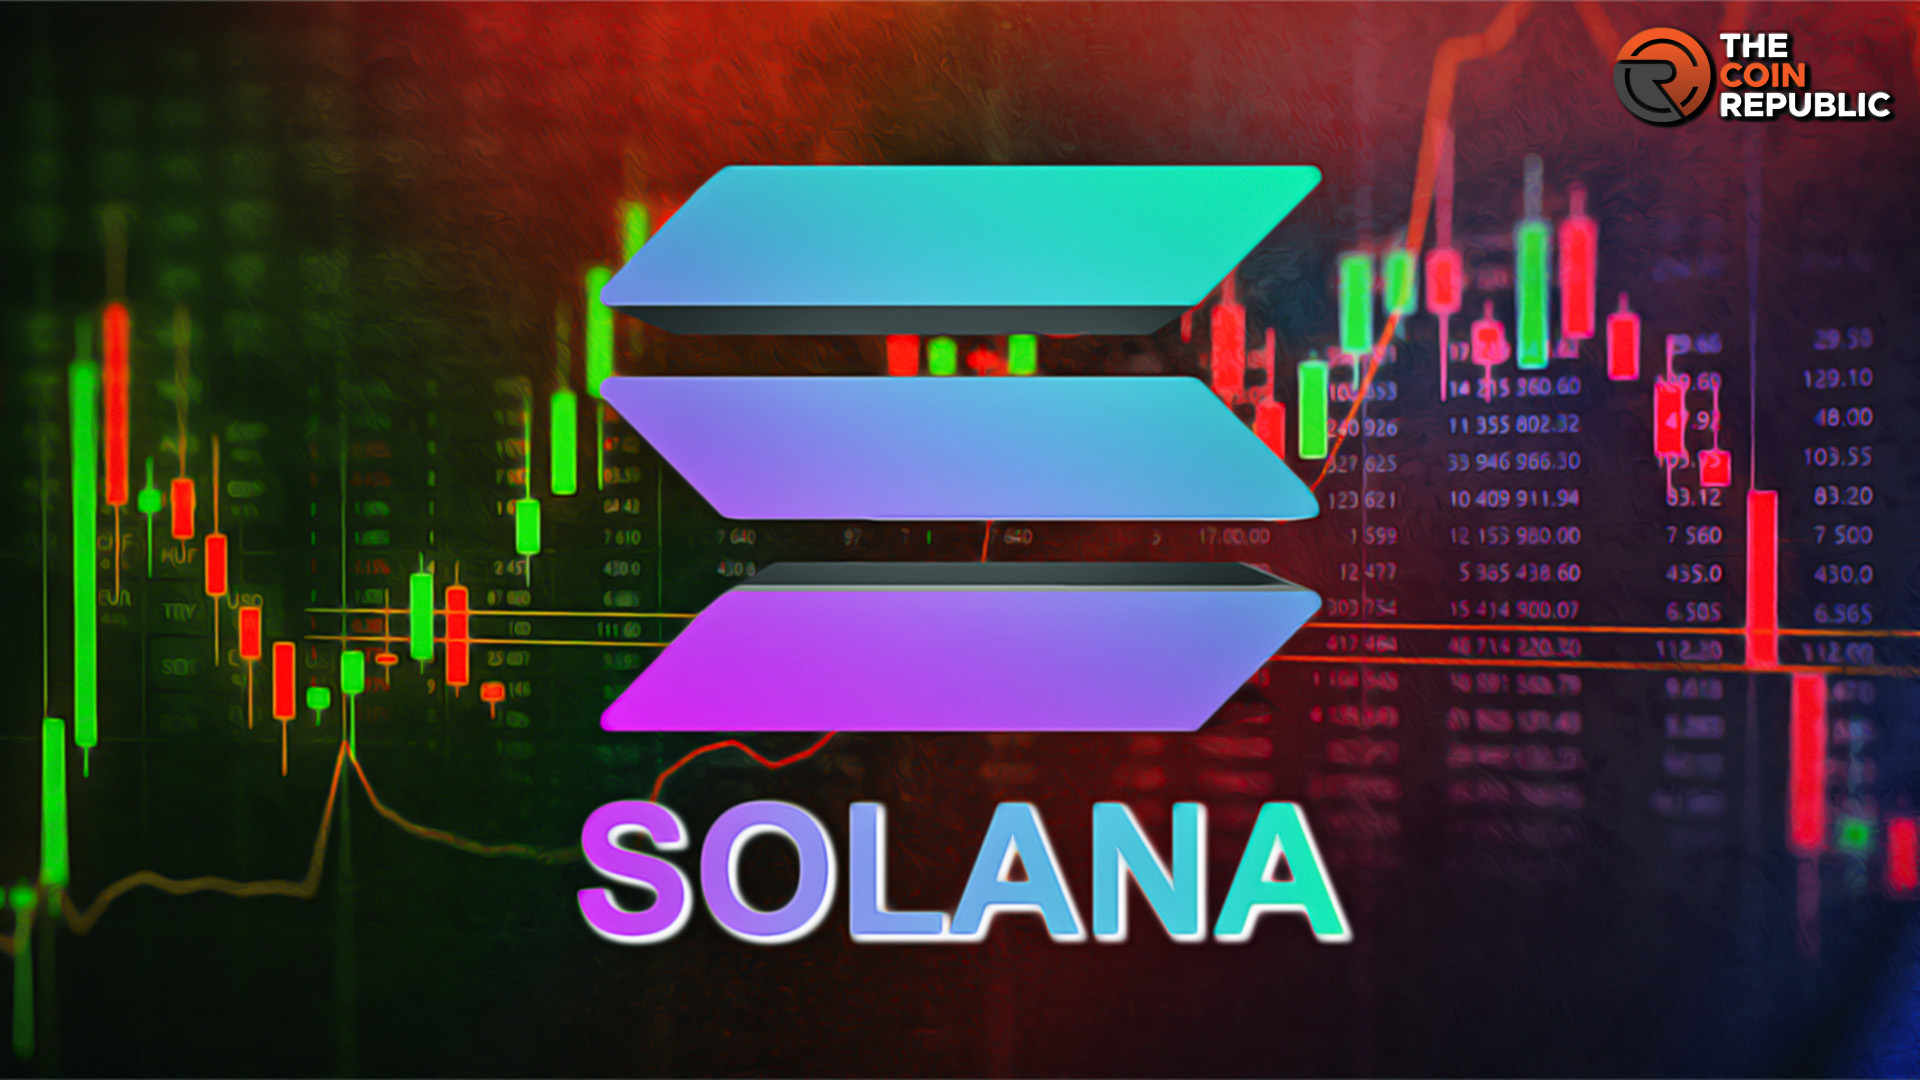 Solana Phone Sales Surge is Replicated in the SOL Coin Price